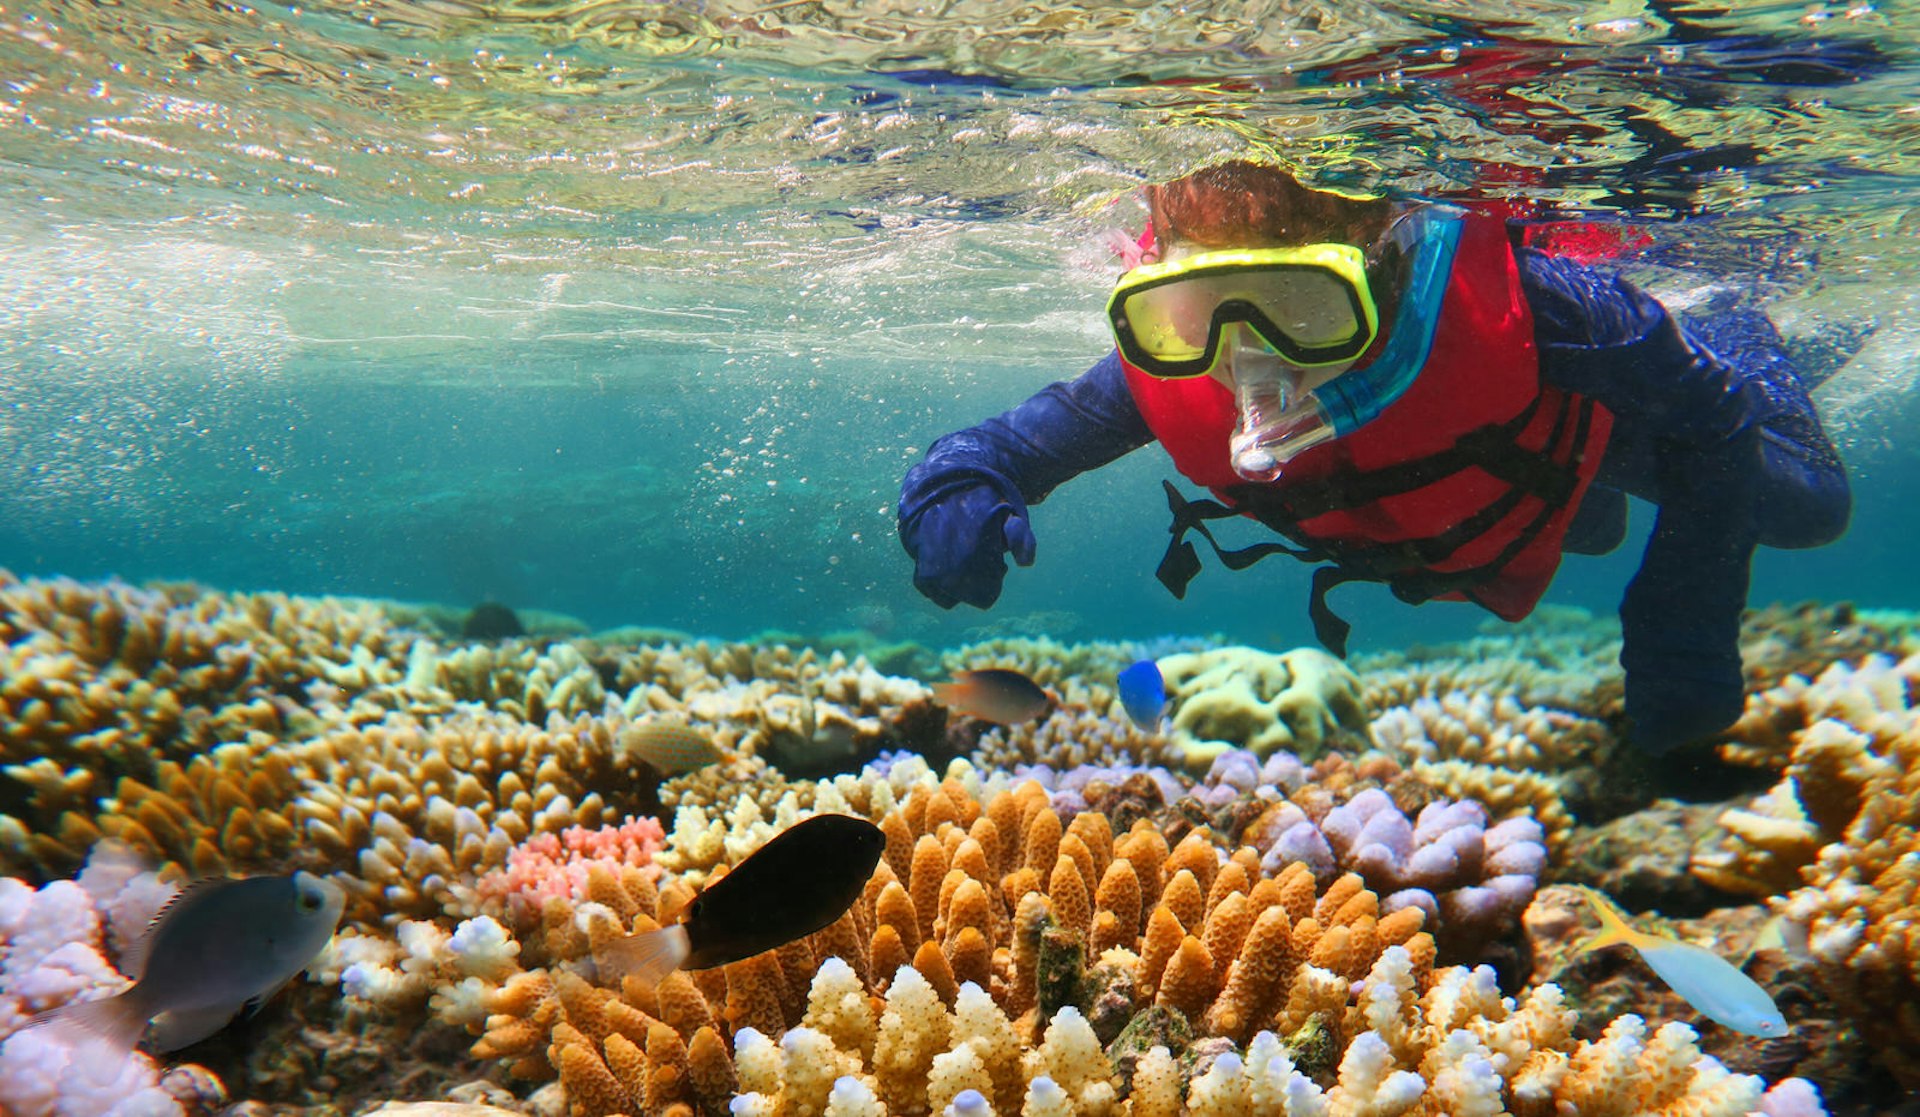 A person snorkels in shallow water over the reef, with colourful coral and a few fish below them